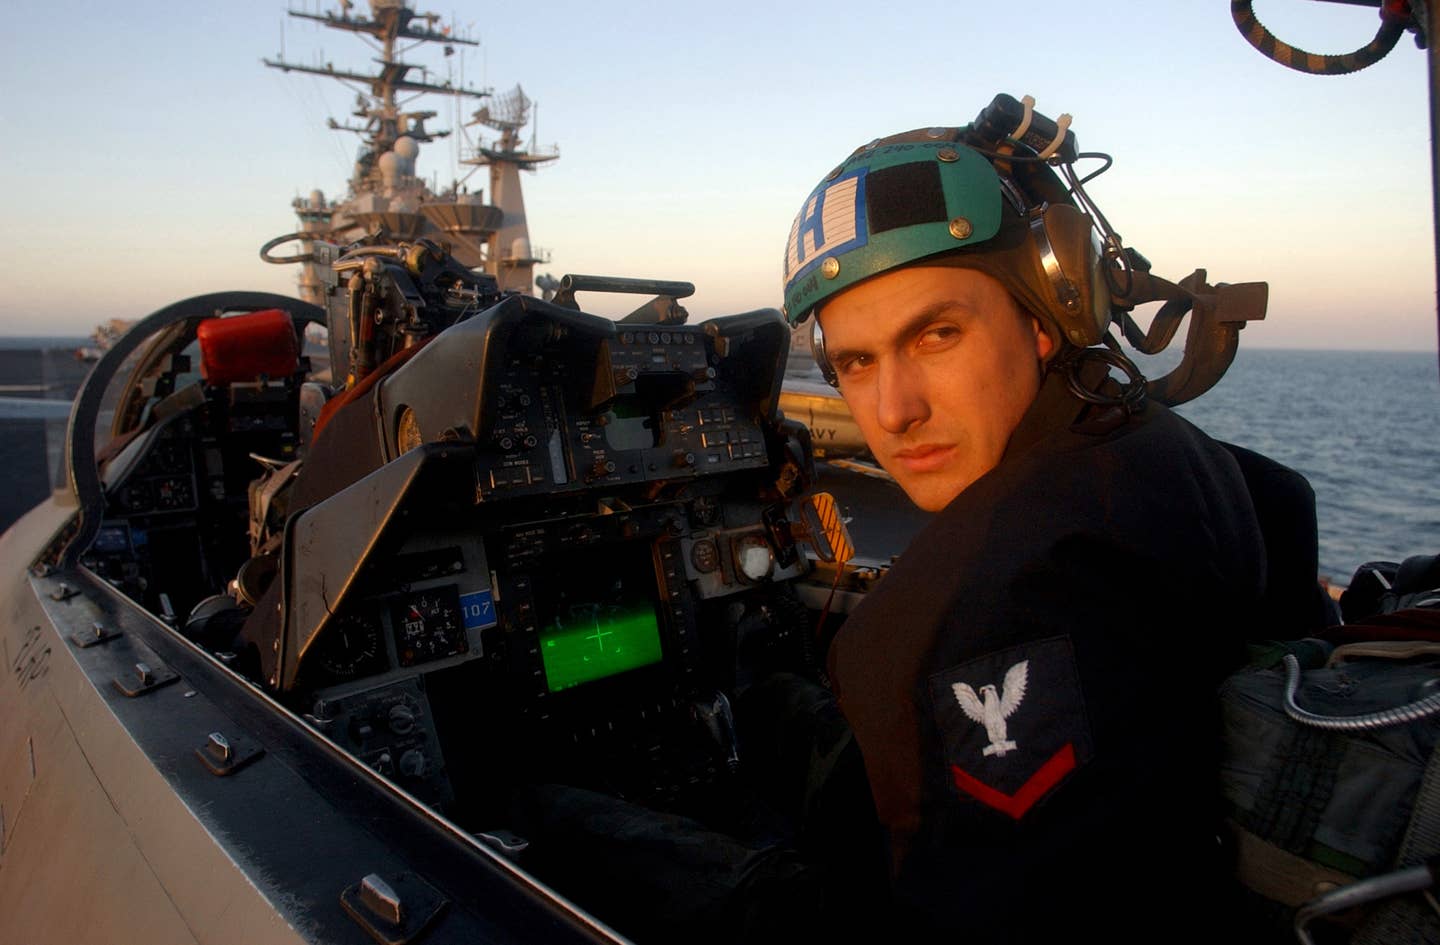 A Photographer’s Mate 3rd Class, assigned to Fighter Squadron 32 (VF-32), runs a system check in the RIO’s rear cockpit of an F-14B Tomcat aboard the aircraft carrier USS <em>Harry S. Truman</em> (CVN-75) in 2005. <em>U.S. Navy photo by Photographer’s Mate Airman Ricardo J. Reyes</em>